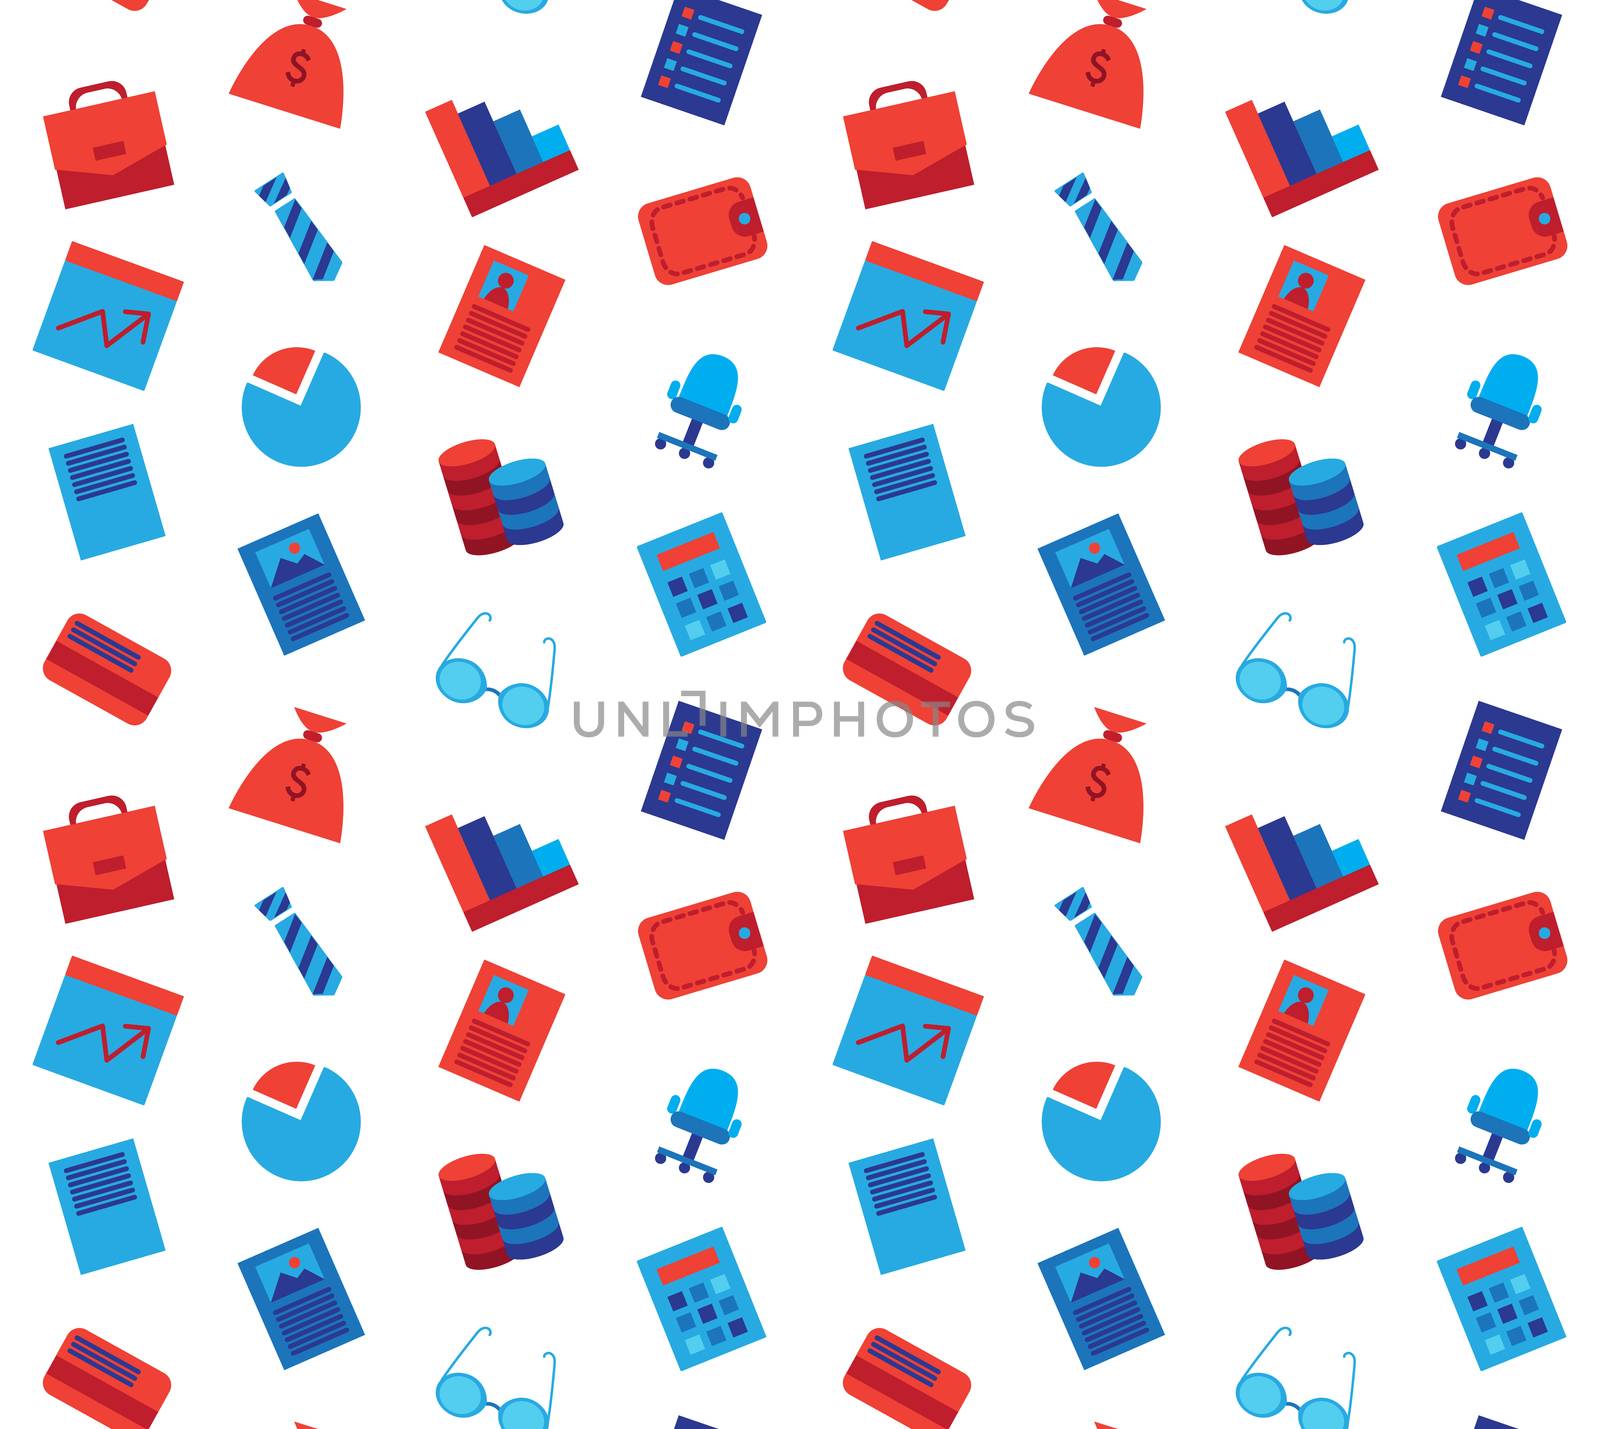 Business icons seamless pattern. Office and document symbols. Vector